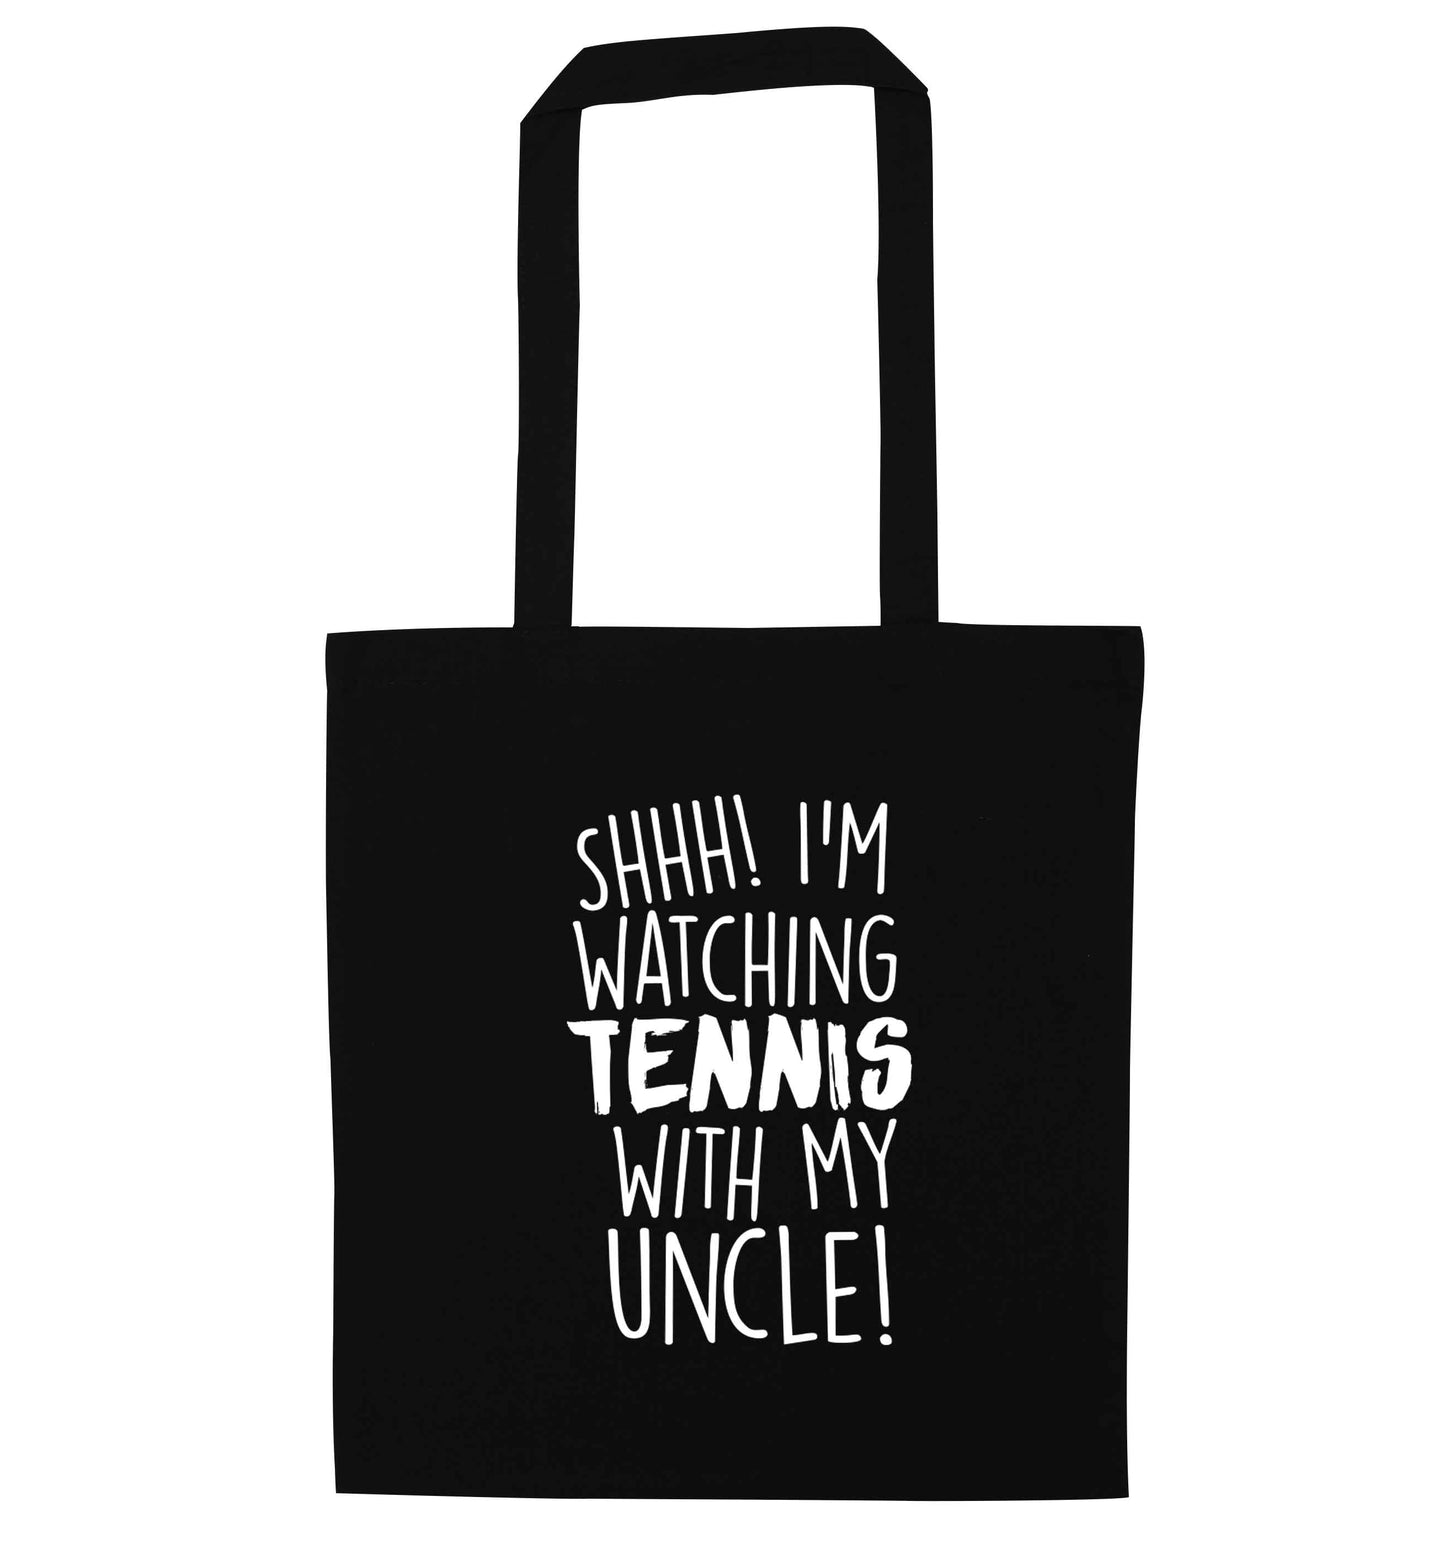 Shh! I'm watching tennis with my uncle! black tote bag